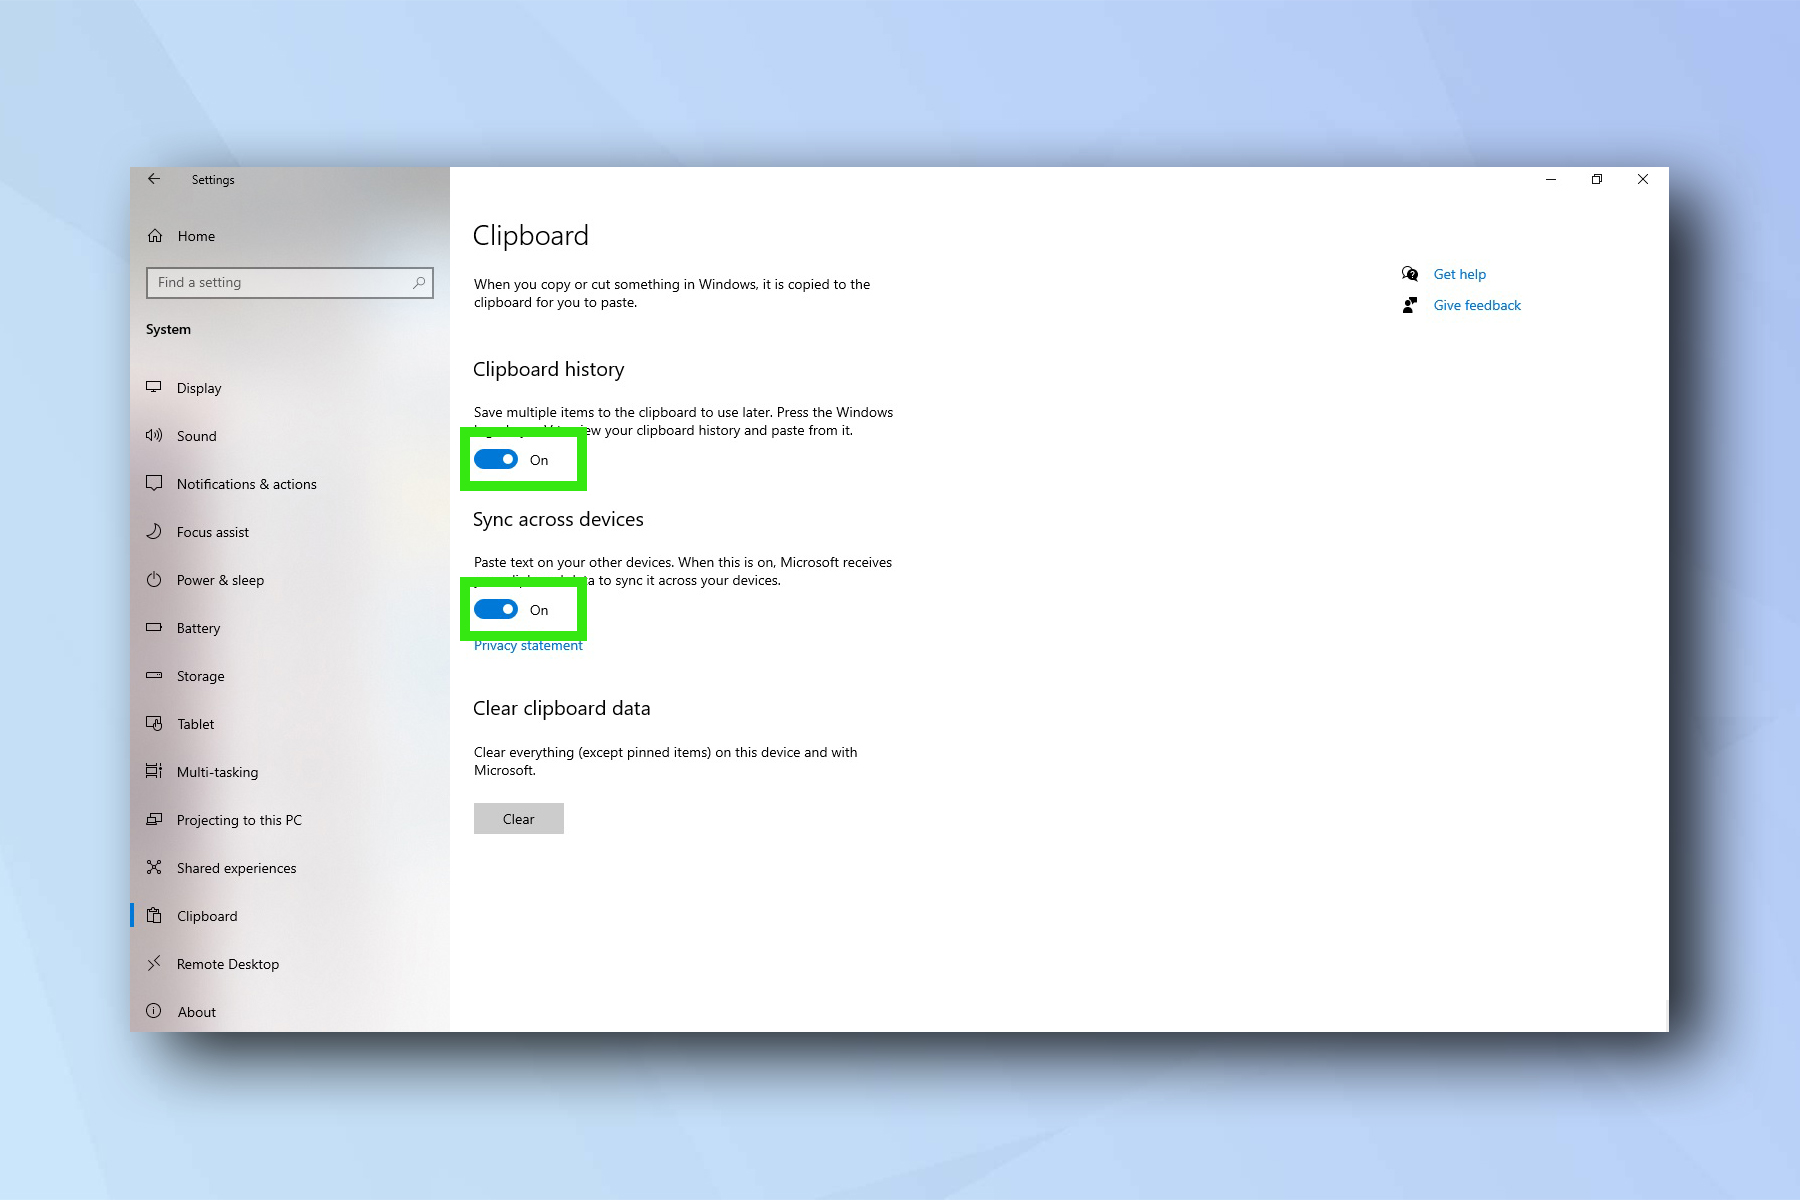 Windows 10 clipboard settings menu, showing how to enable clipboard history in Windows